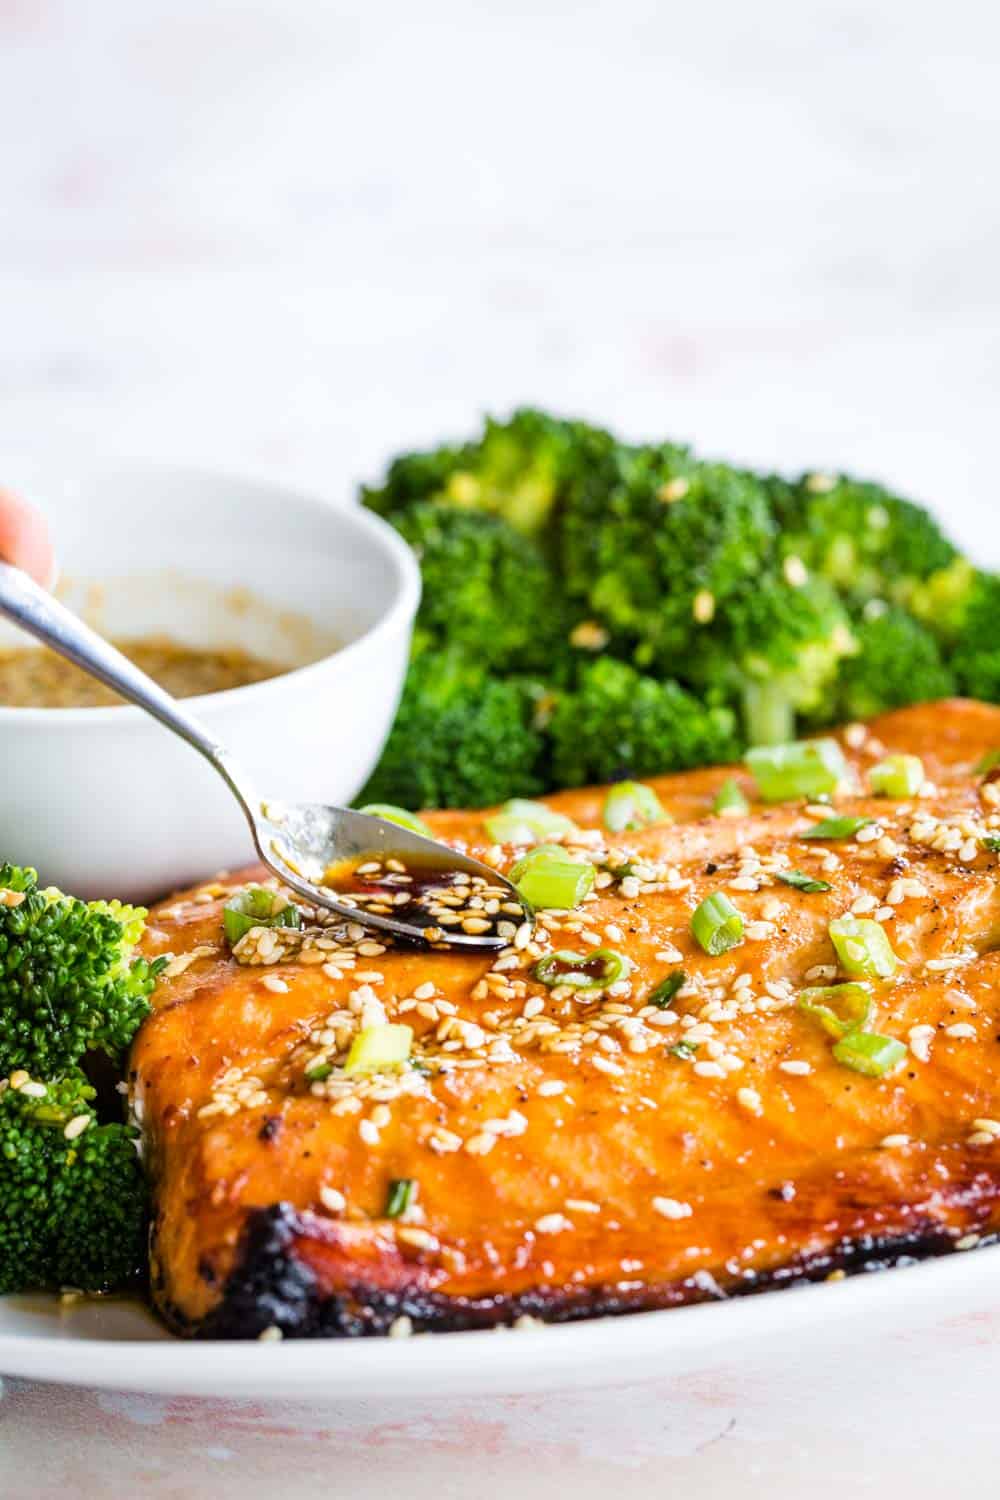 Spooning sesame maple glaze over broiled salmon on a plate with broccoli.